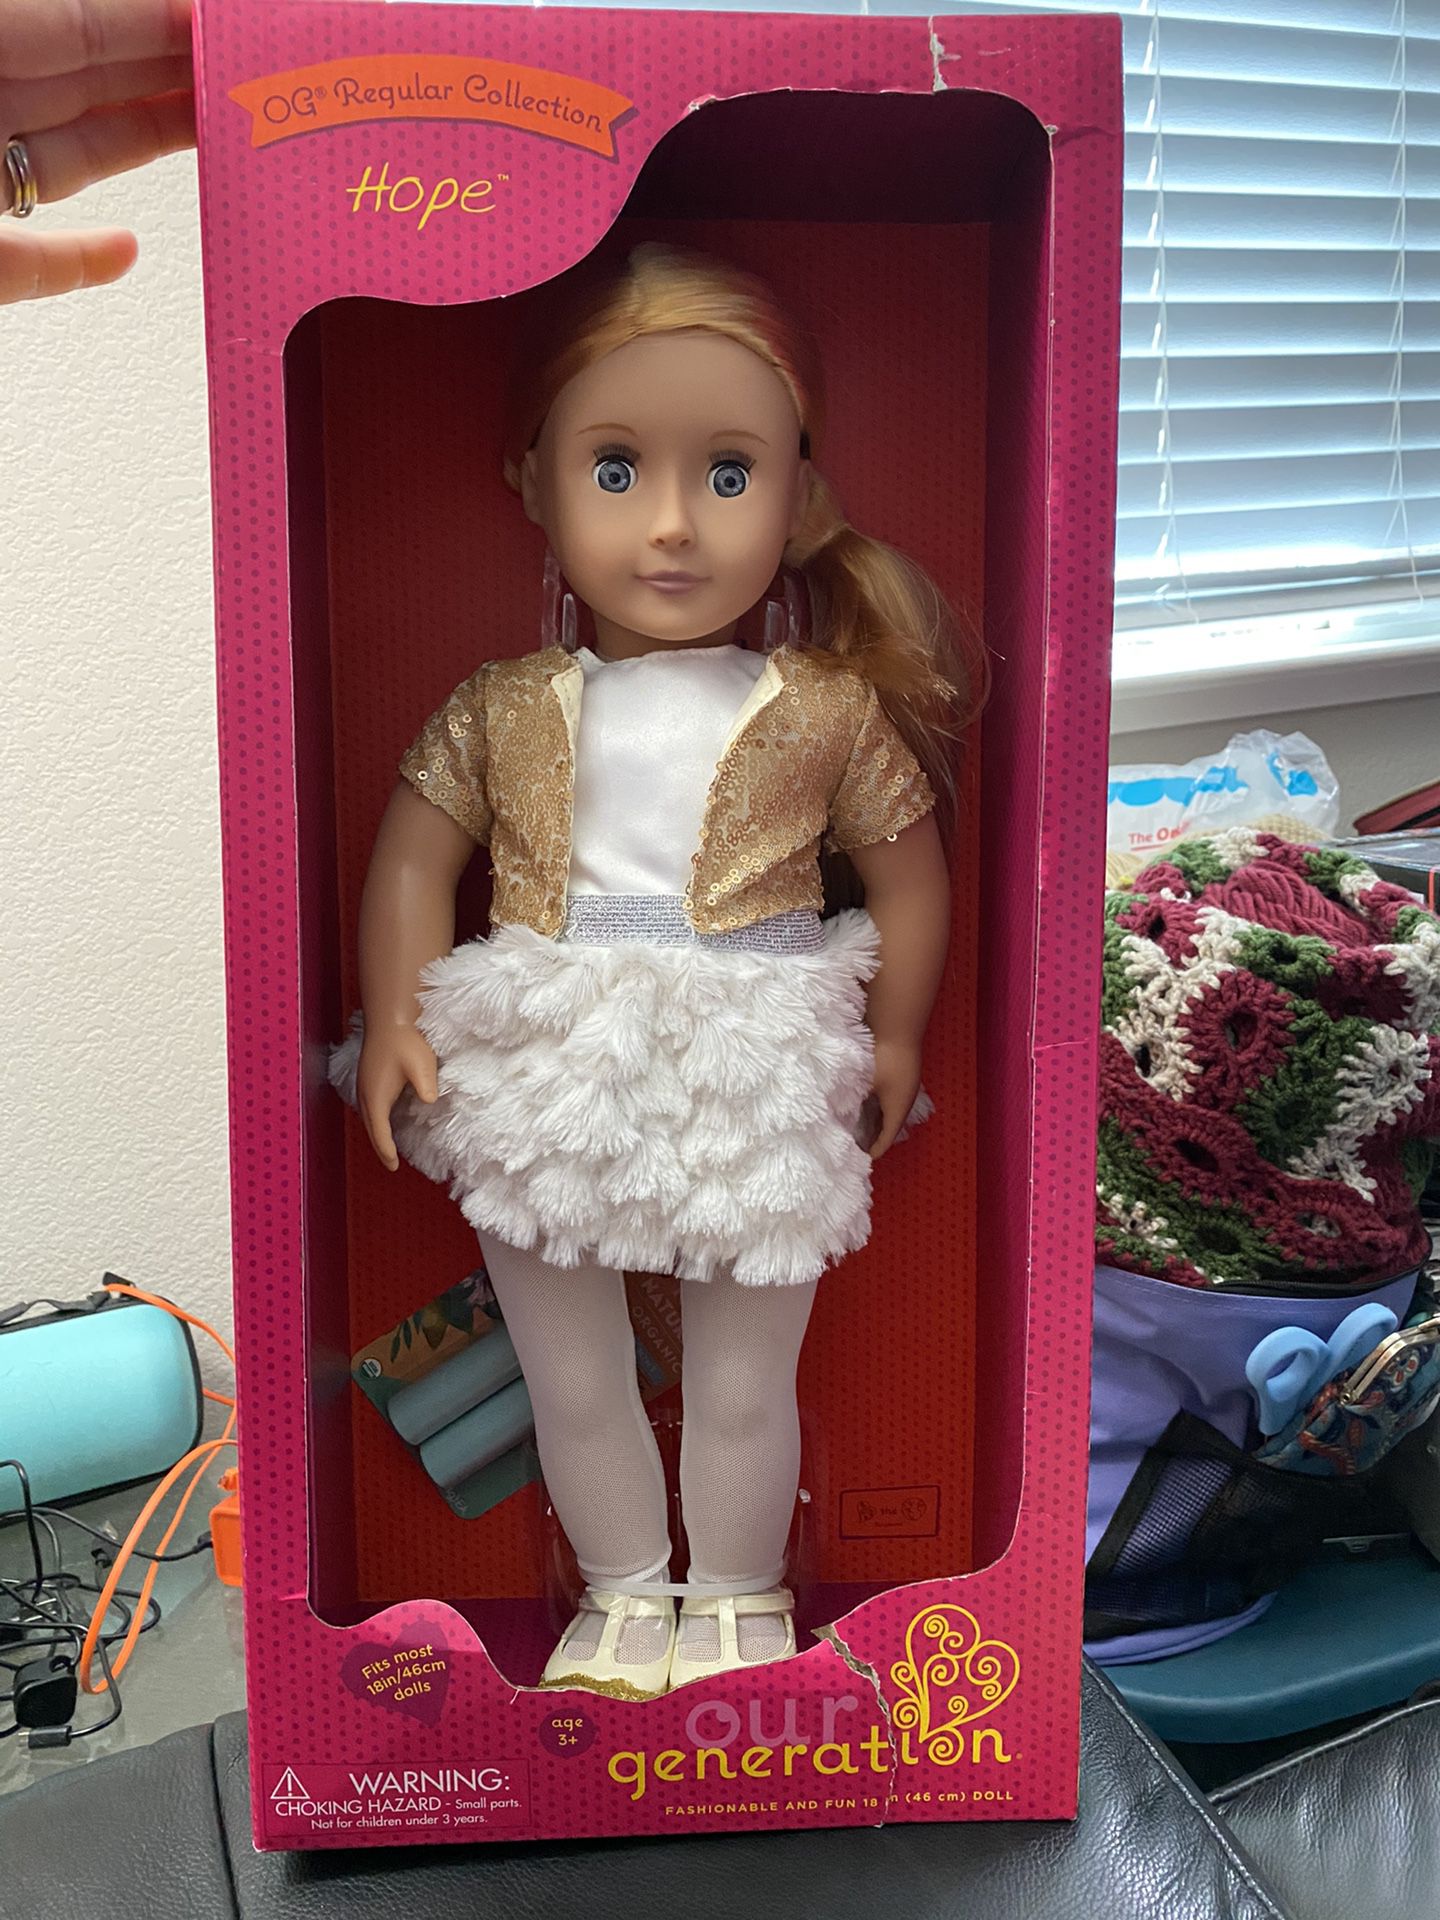 New Our Generation Hope 18” Doll!